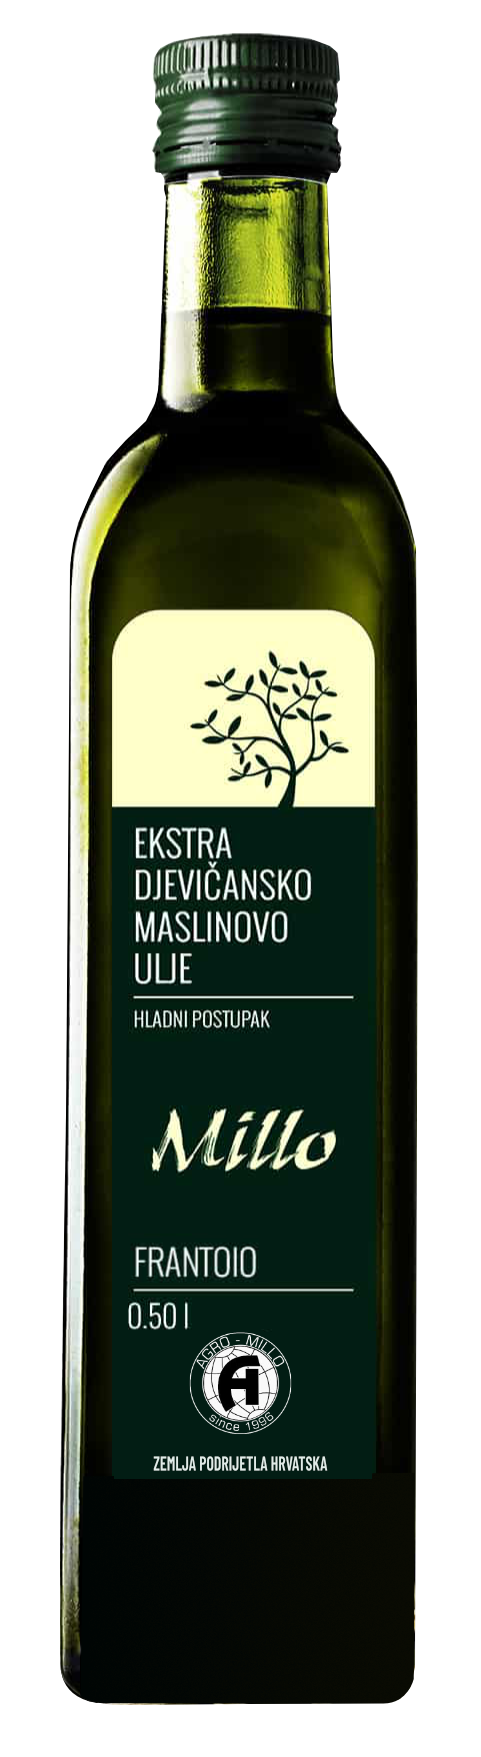 Agro Millo High Quality Extra Virgin Olive Oil Istria